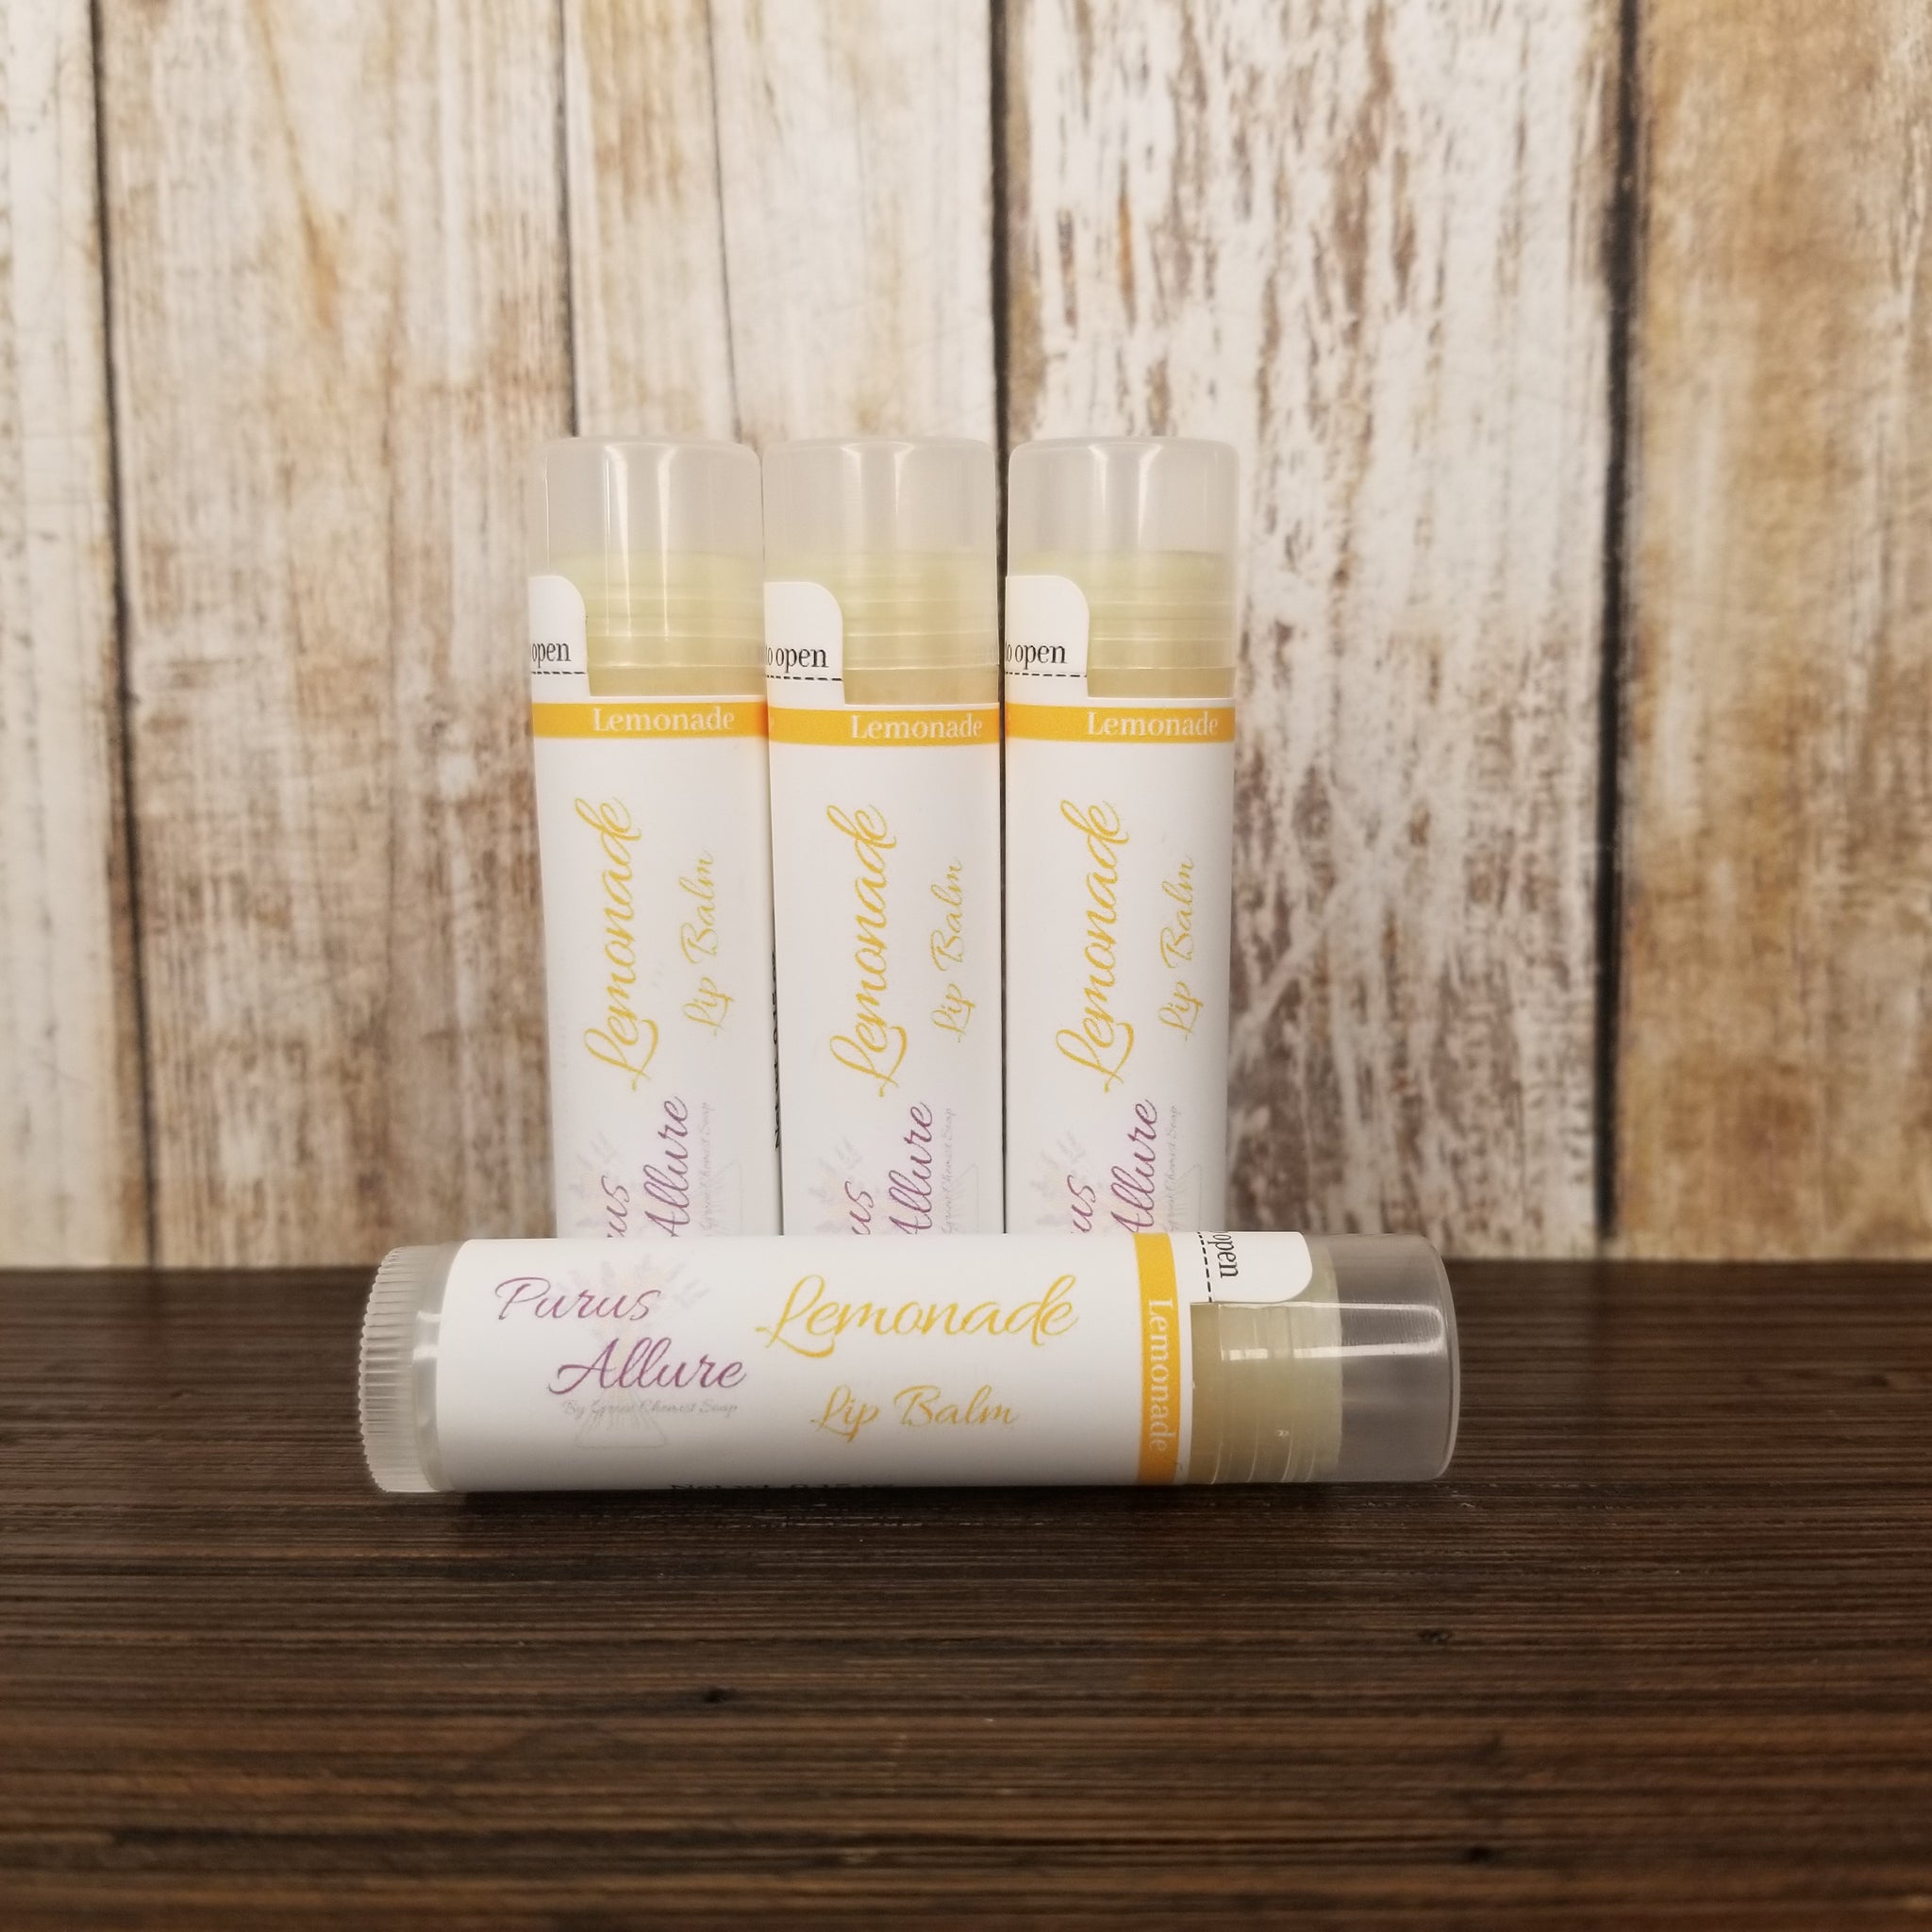 Beeswax Lip Balm with Shea Butter and Lanolin - 0.15oz - Multiple Varieties